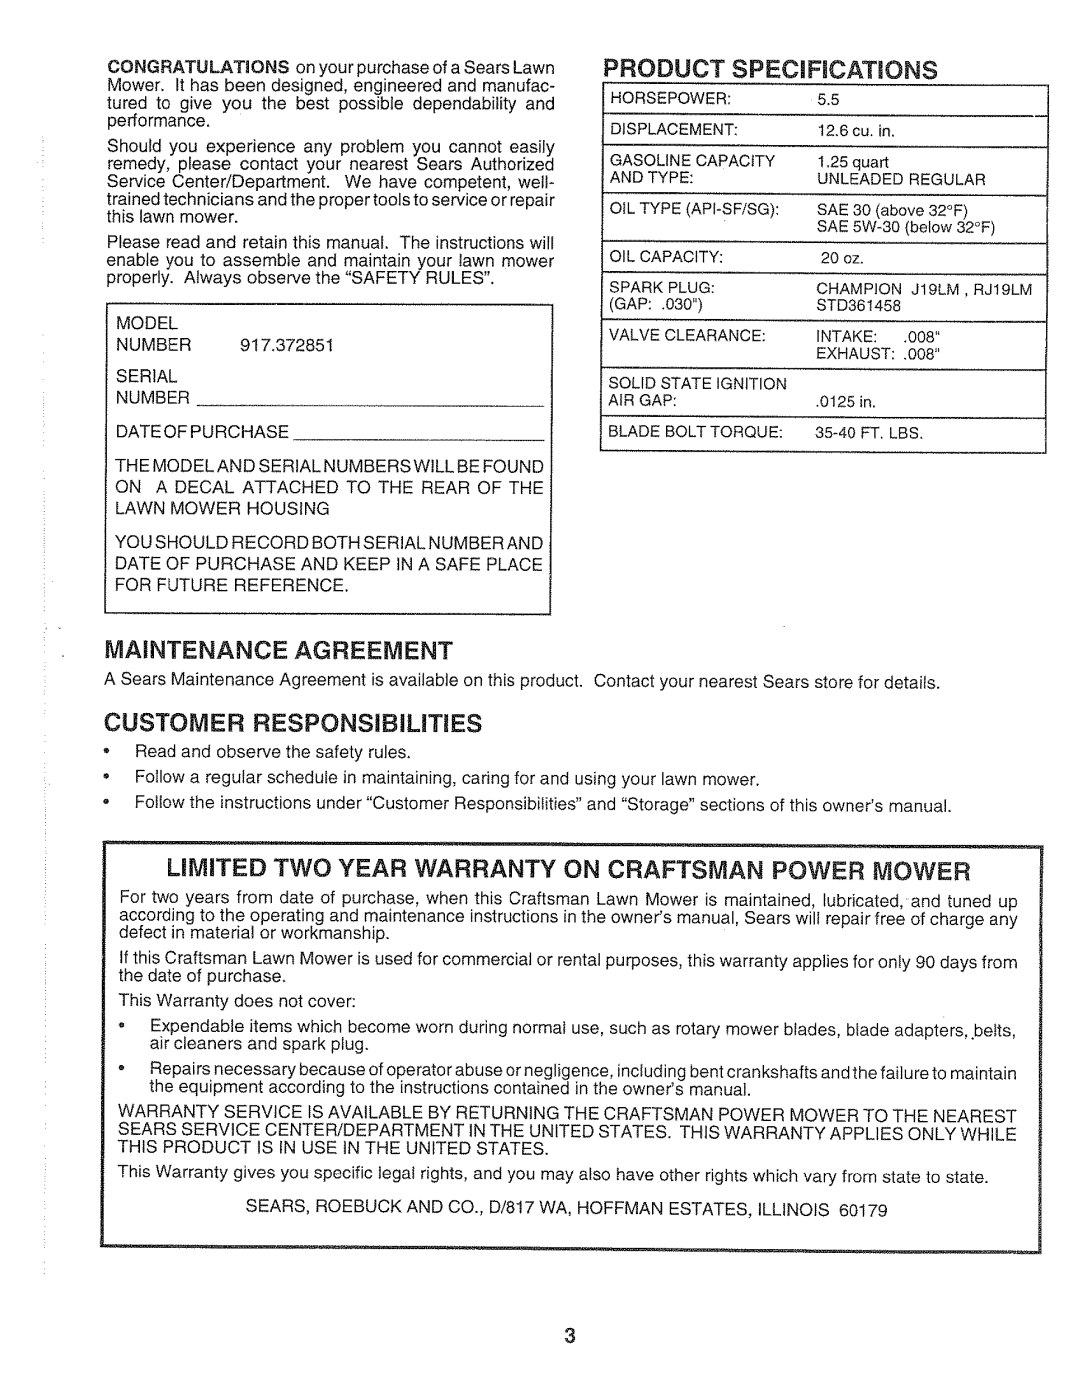 Sears 917.372851 owner manual PRODUCT SPECIFiCATiONS, Maintenance Agreement, Customer Responsibilities 